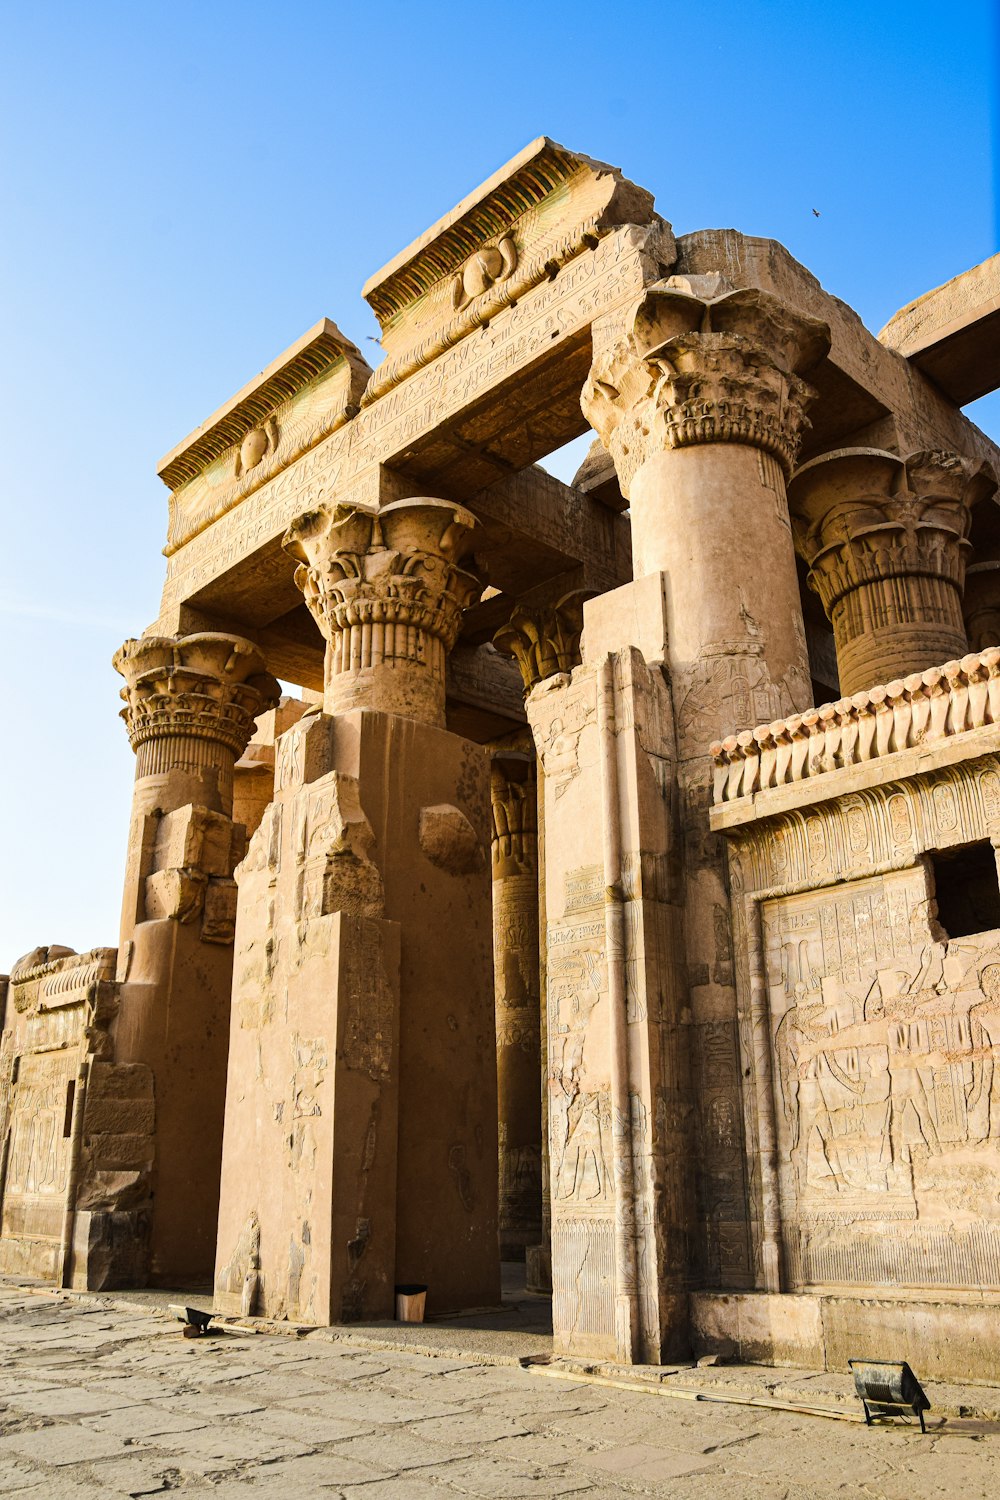 Temple of Kom Ombo with pillars